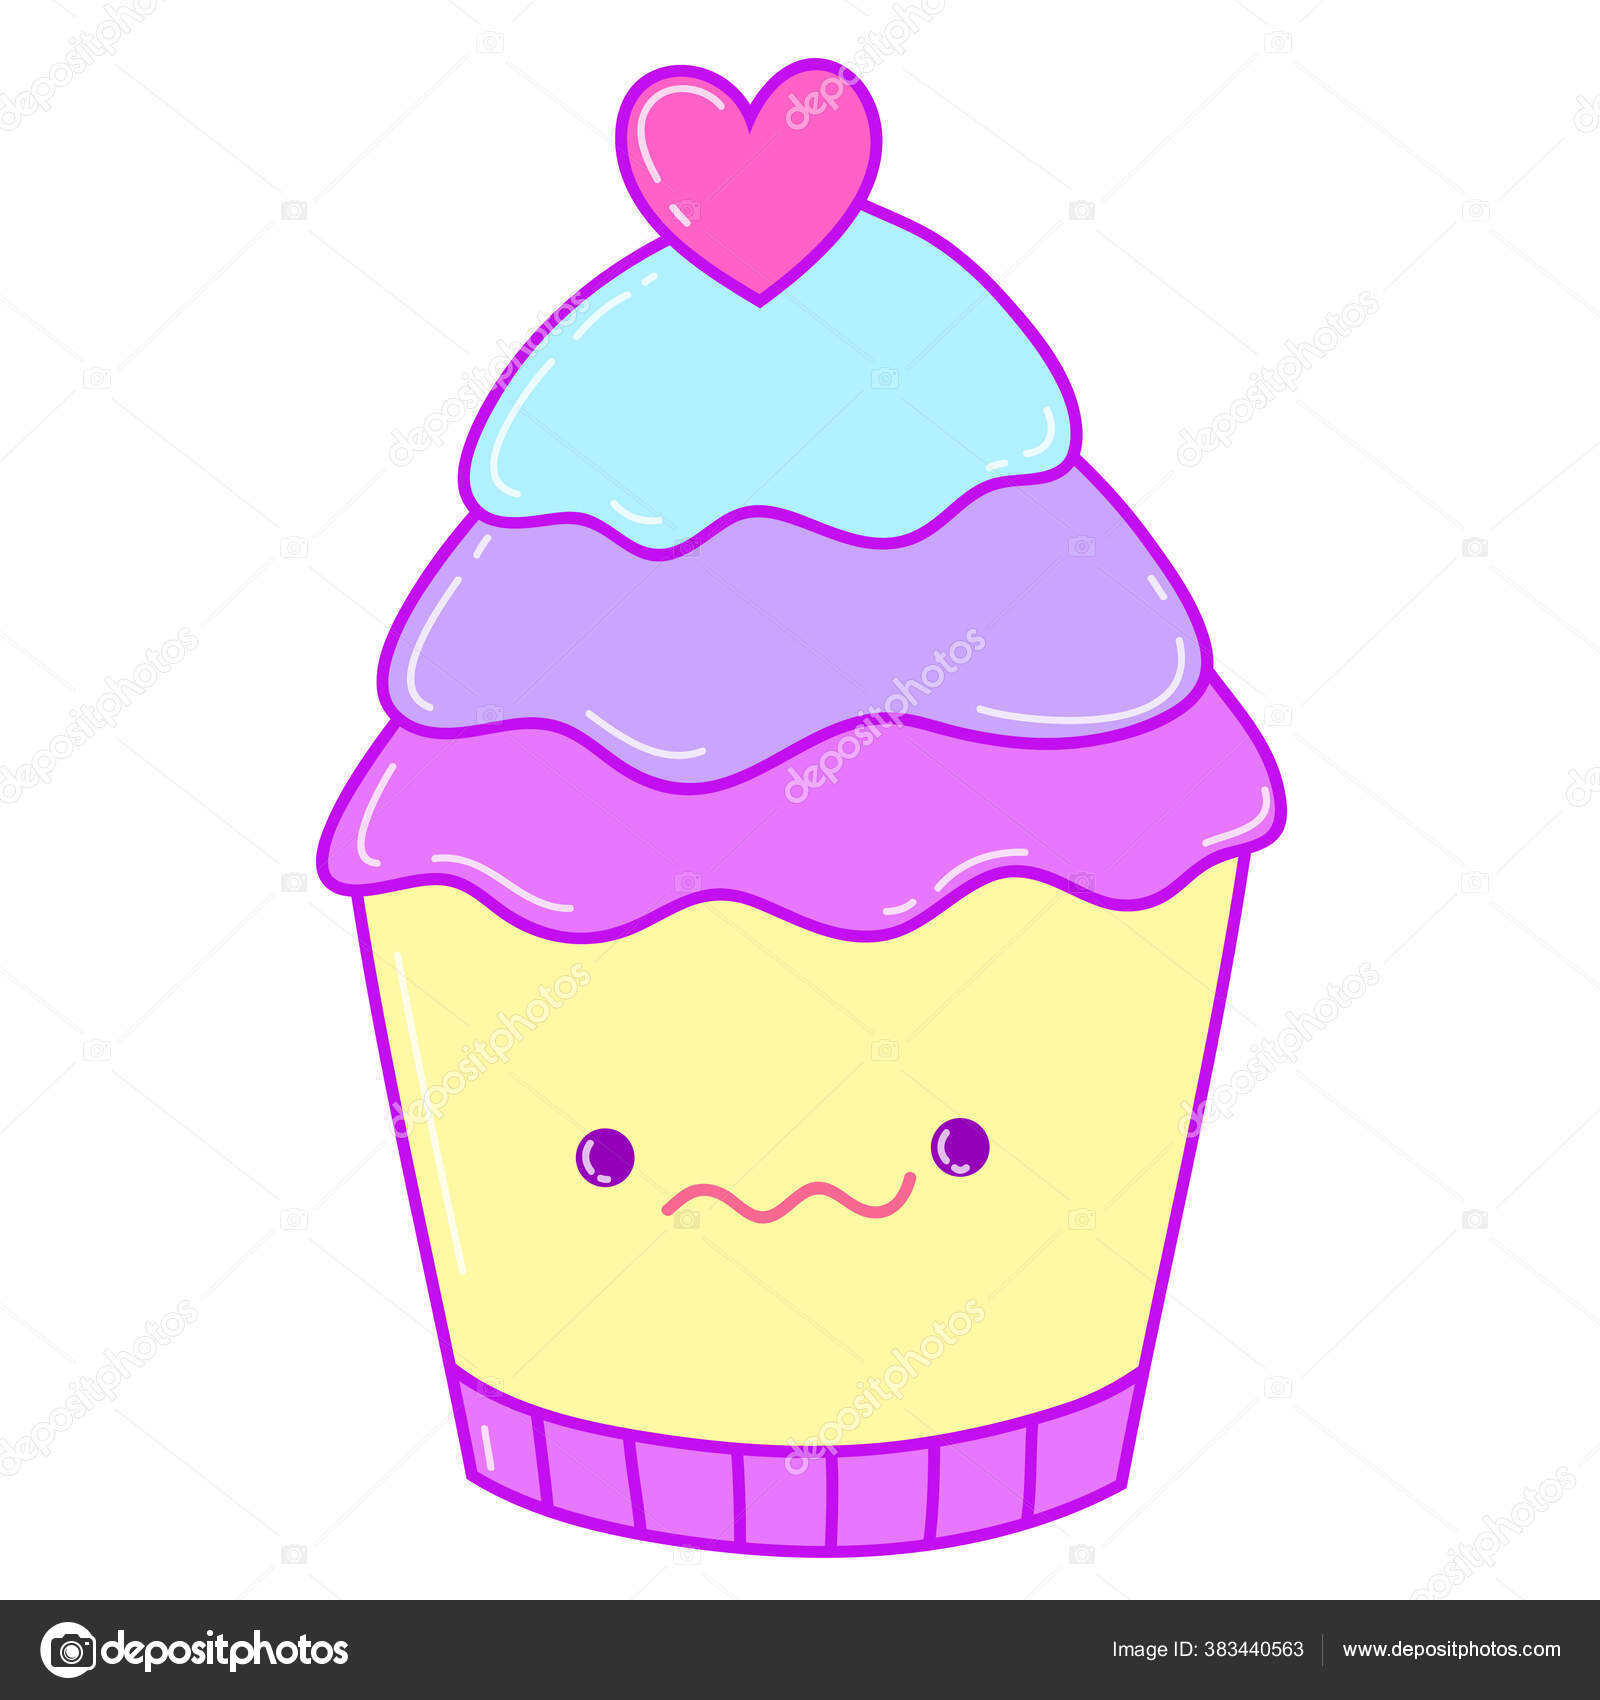 How to Draw a Cupcake - A Step-by-Step Easy Cupcake Drawing Tutorial